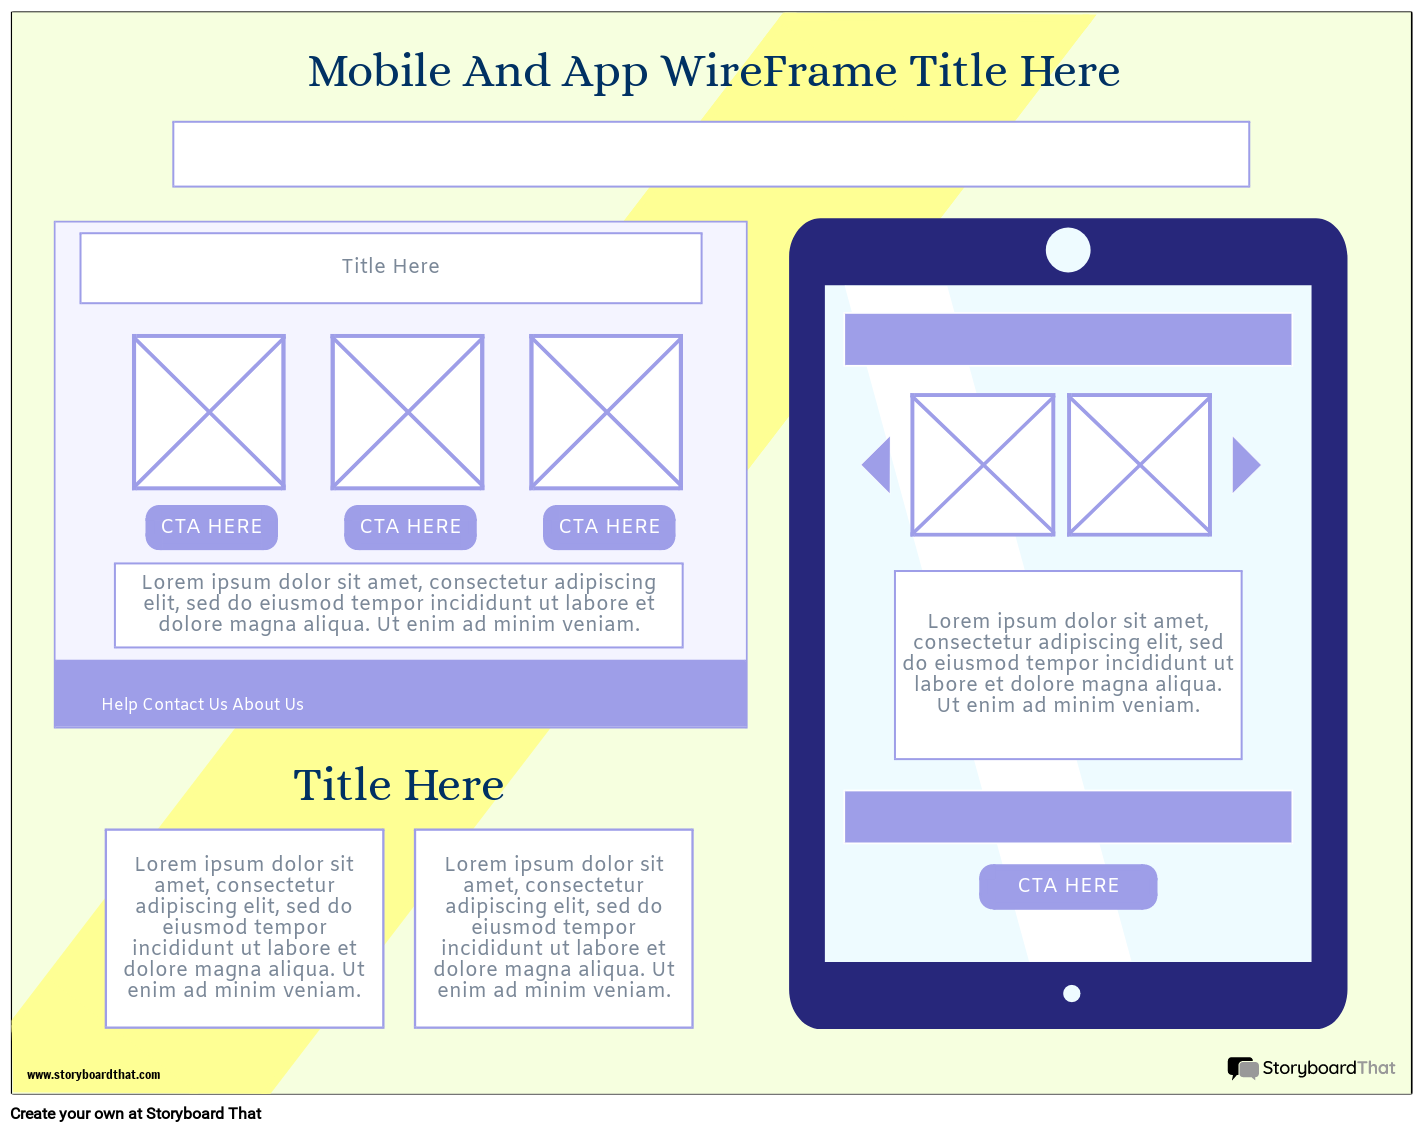 Corporate Tablet WireFrame Template 2